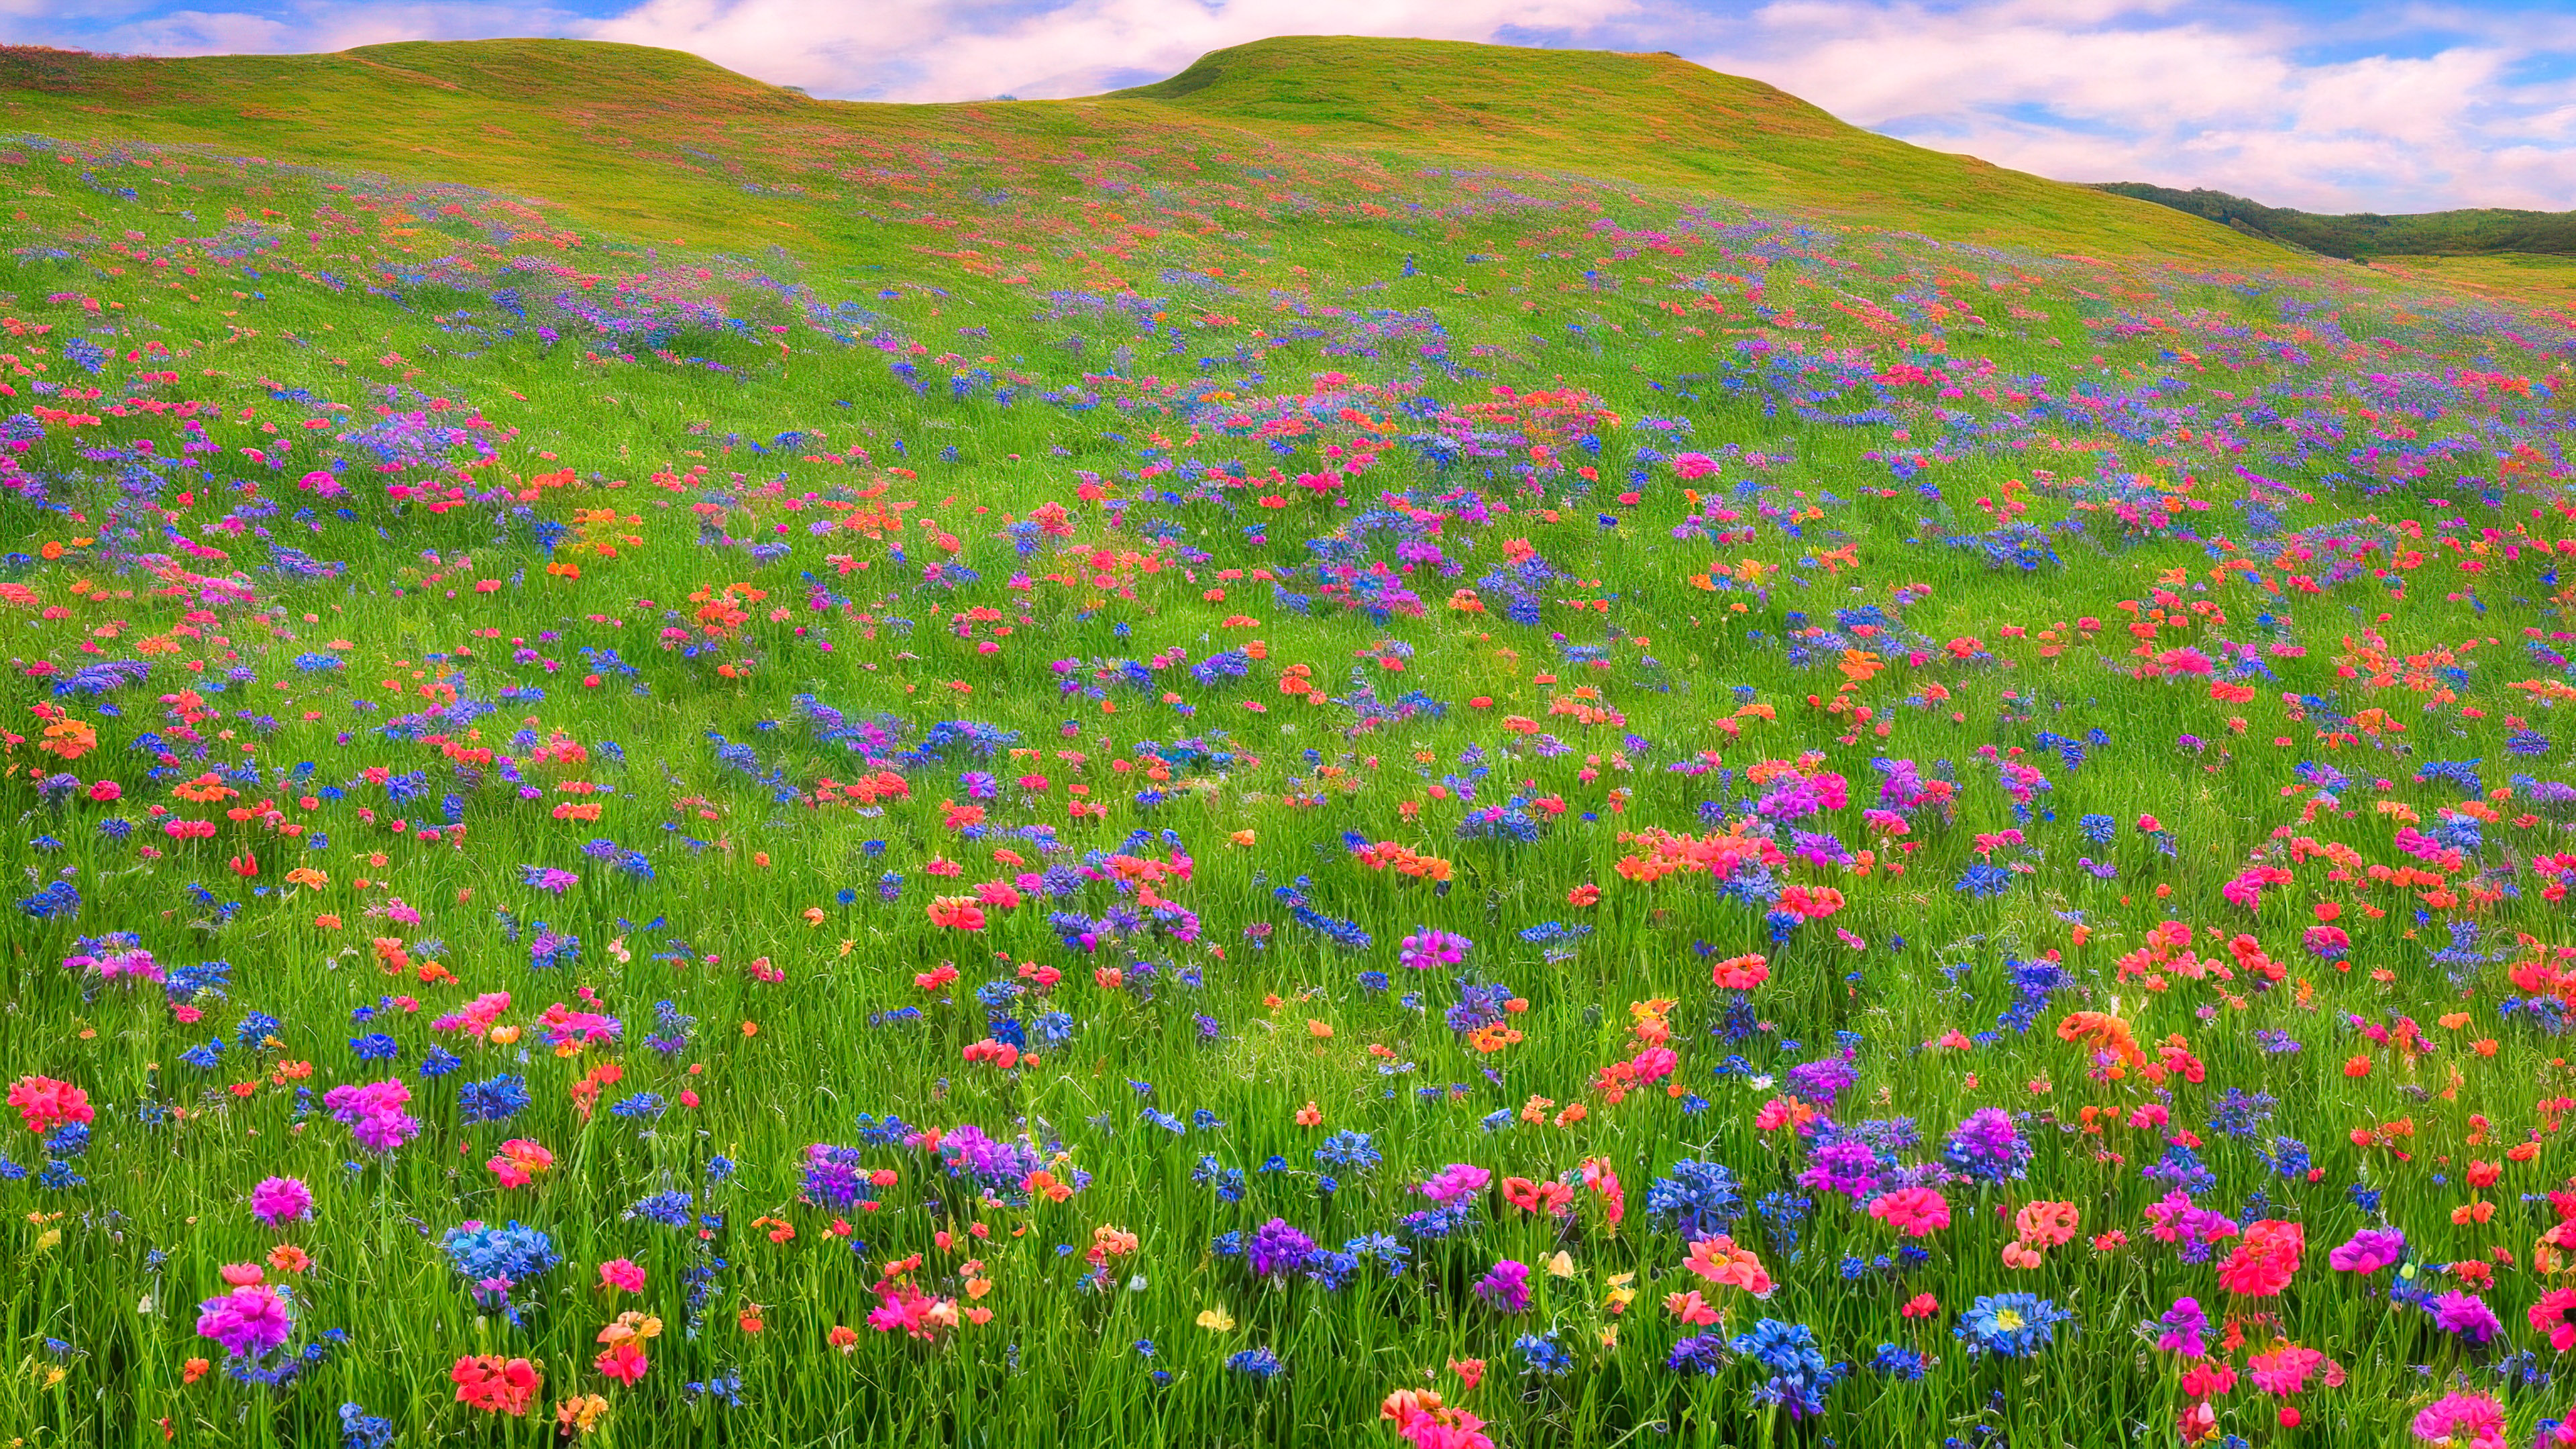 Get a glimpse of the countryside with our landscape background wallpaper, showcasing a picturesque meadow covered in colorful wildflowers, with a backdrop of rolling hills.